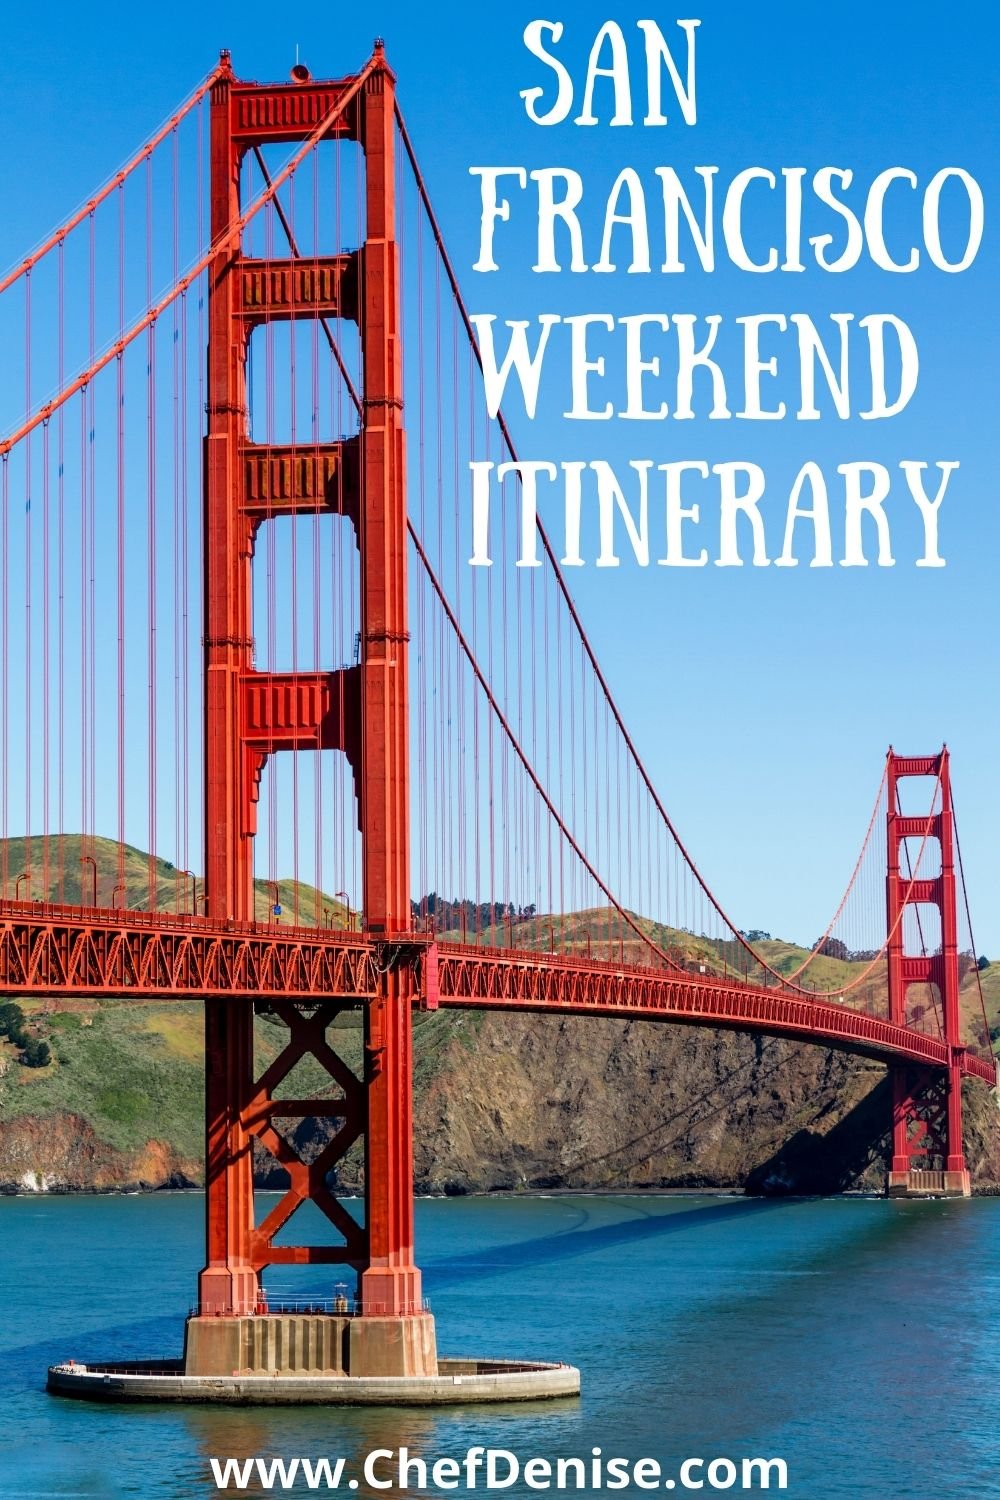 Pin for San Francisco Weekend Itinerary